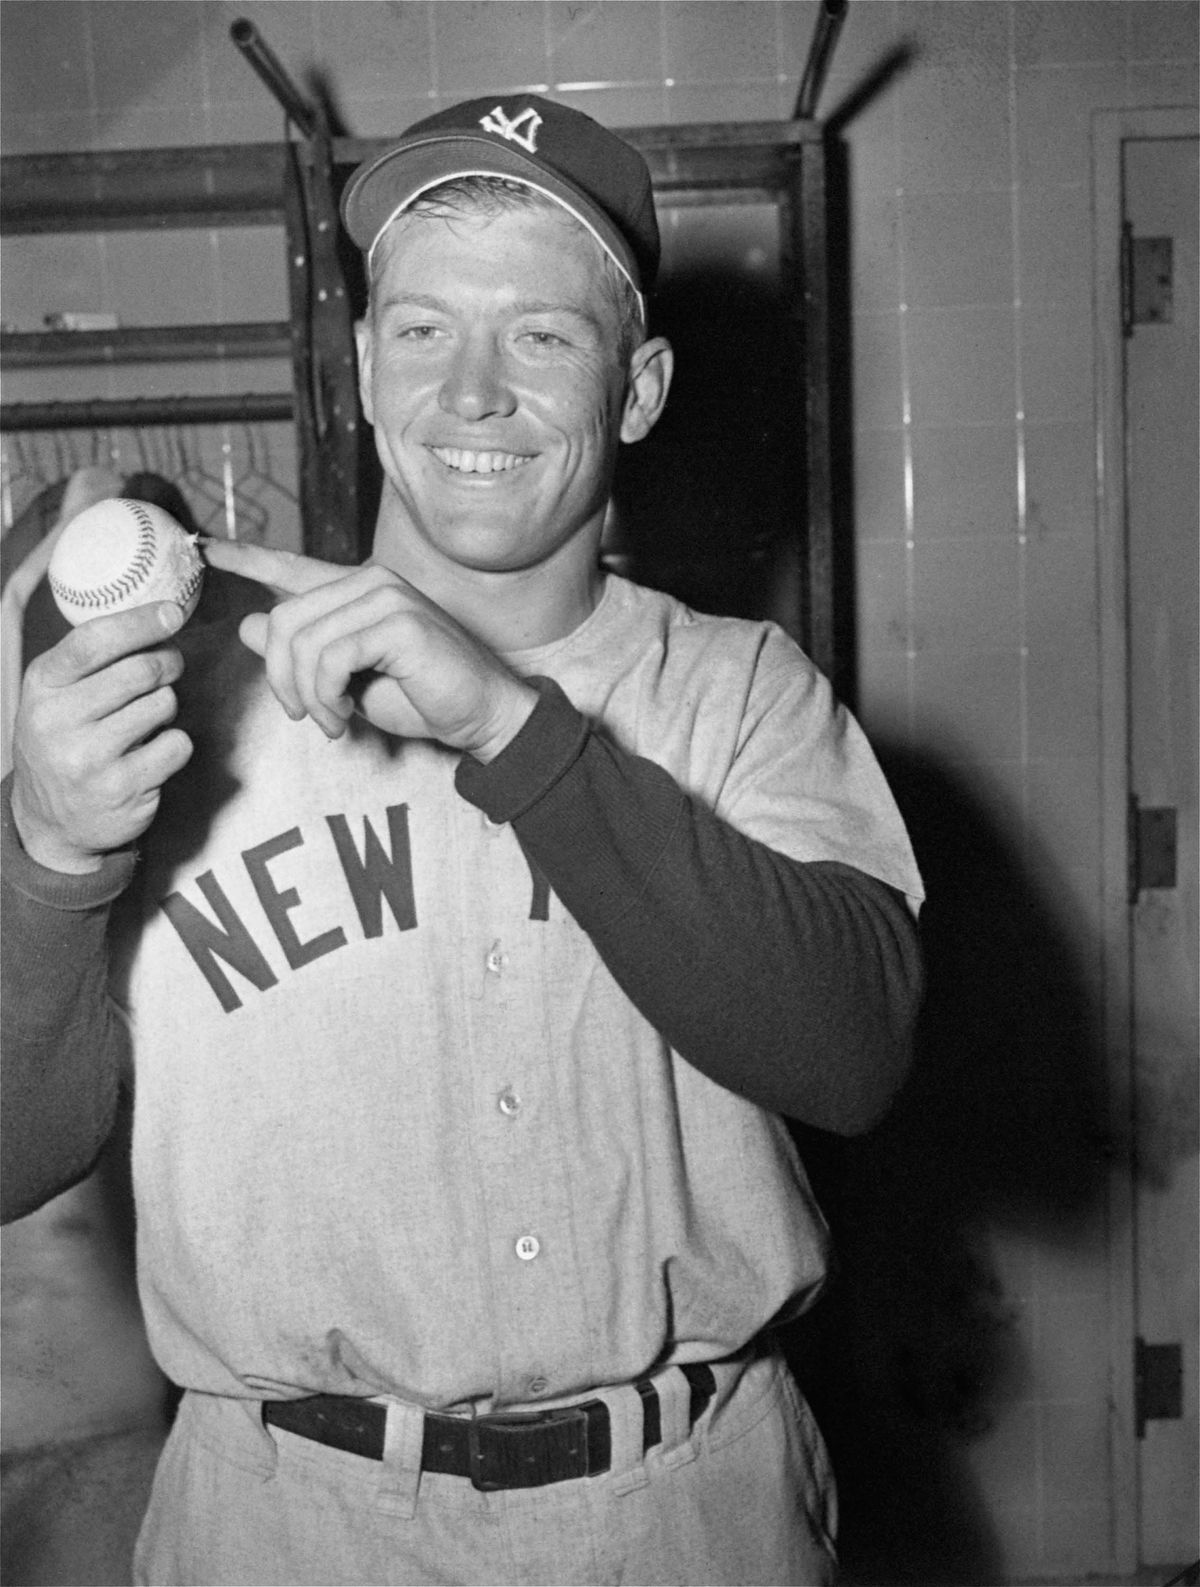 Mickey Mantle of the New York Yankees holds the ball he hit for 565 feet April 17, 1953, the longest homer ever hit in Griffith Stadium in Washington. Mantle, in the dressing room after the game with the Washington Senators, points to the dent in the ball where it hit a house after clearing center field. Residents of the house returned the ball to Mickey. The Yankees won 7-3.  (Associated Press)